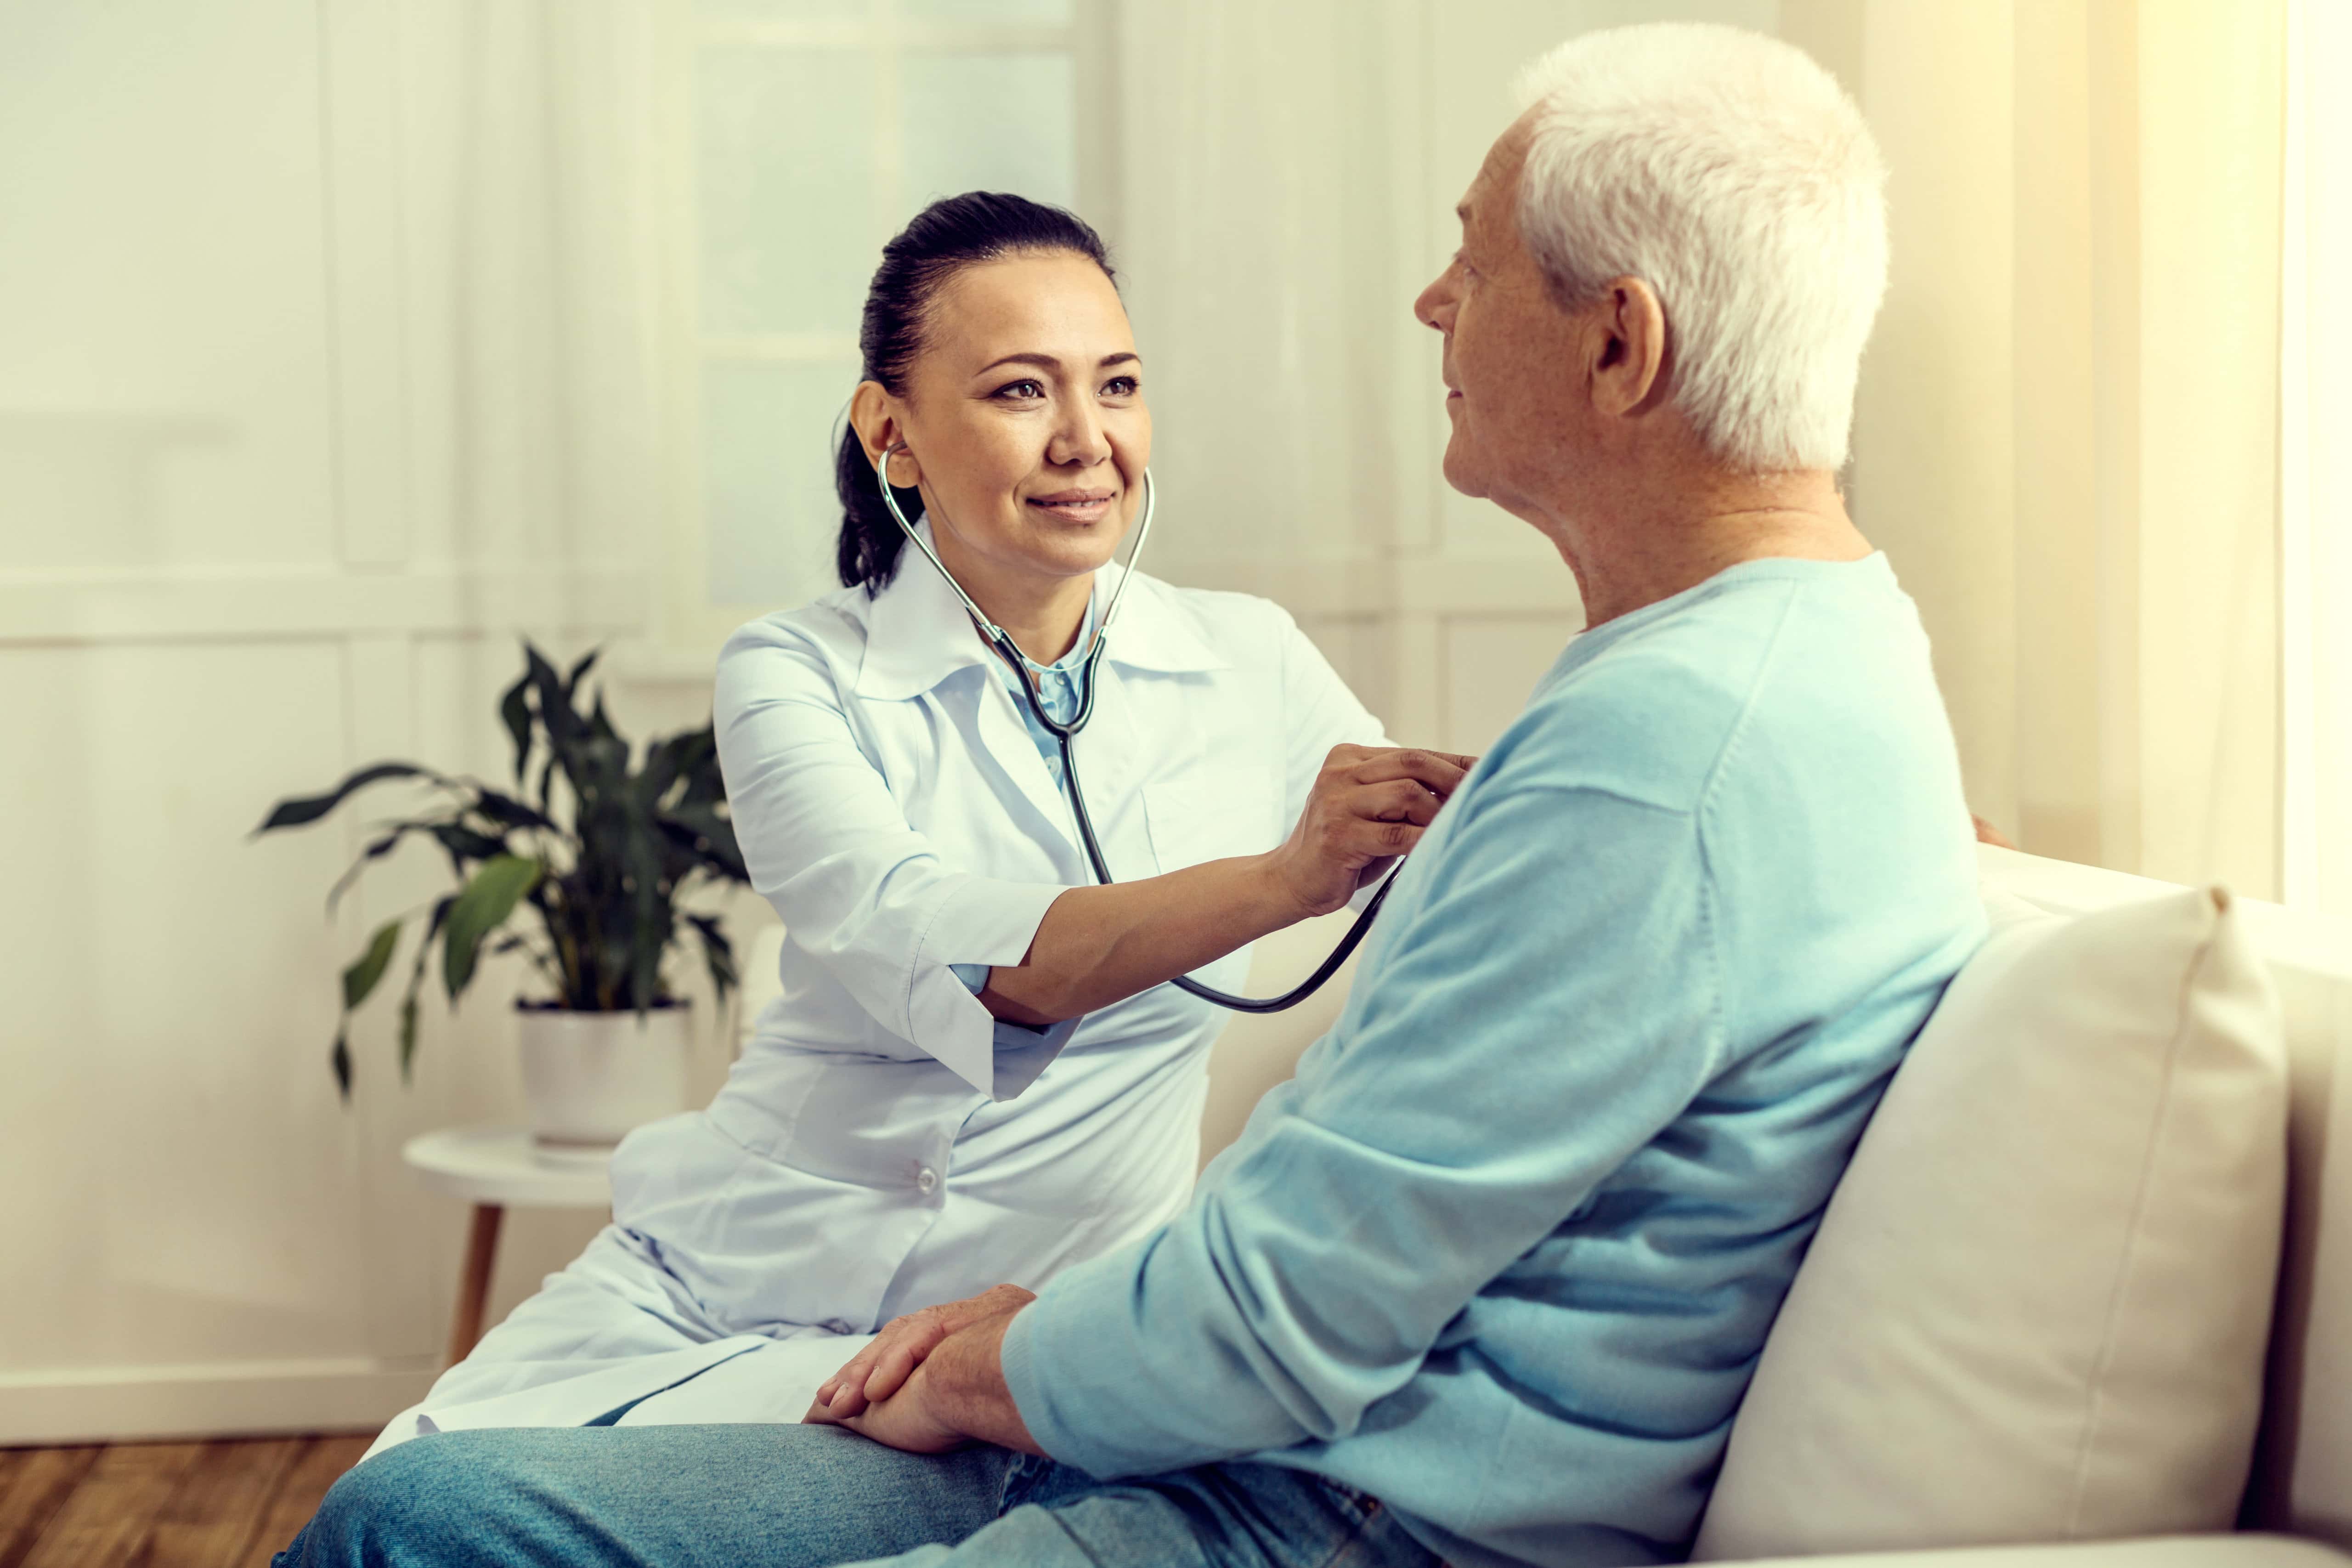 Smiling nurse listening to heart beating of retired patient